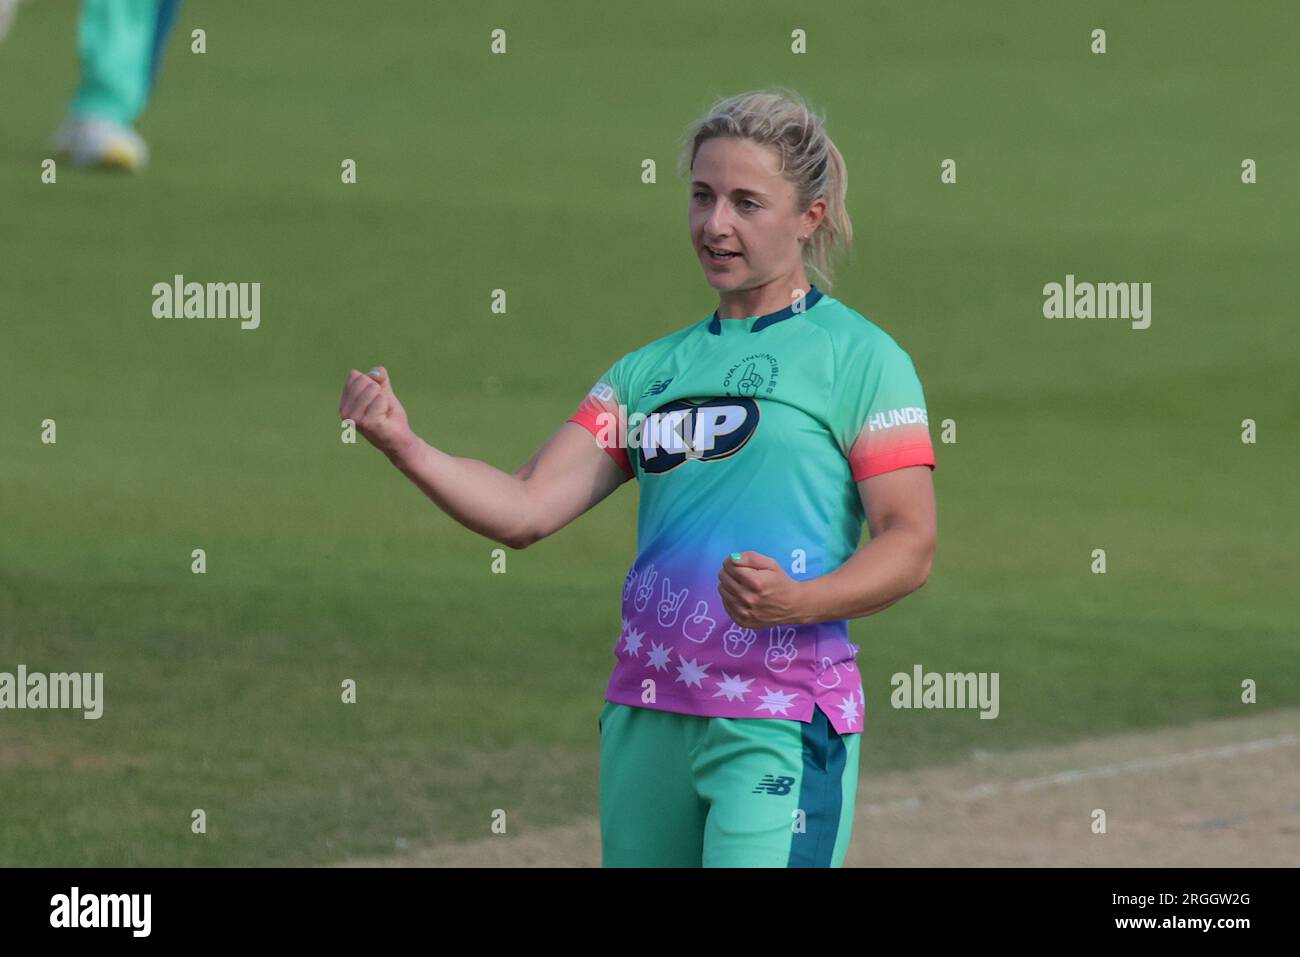 London, UK. 9th Aug, 2023. Eva Gray of The Oval Invincibles celebrates after getting the wicket of Amanda-Jade Wellington as Oval Invincibles take on the Manchester Originals in The Hundred women's competition at The Kia Oval. Credit: David Rowe/Alamy Live News Stock Photo